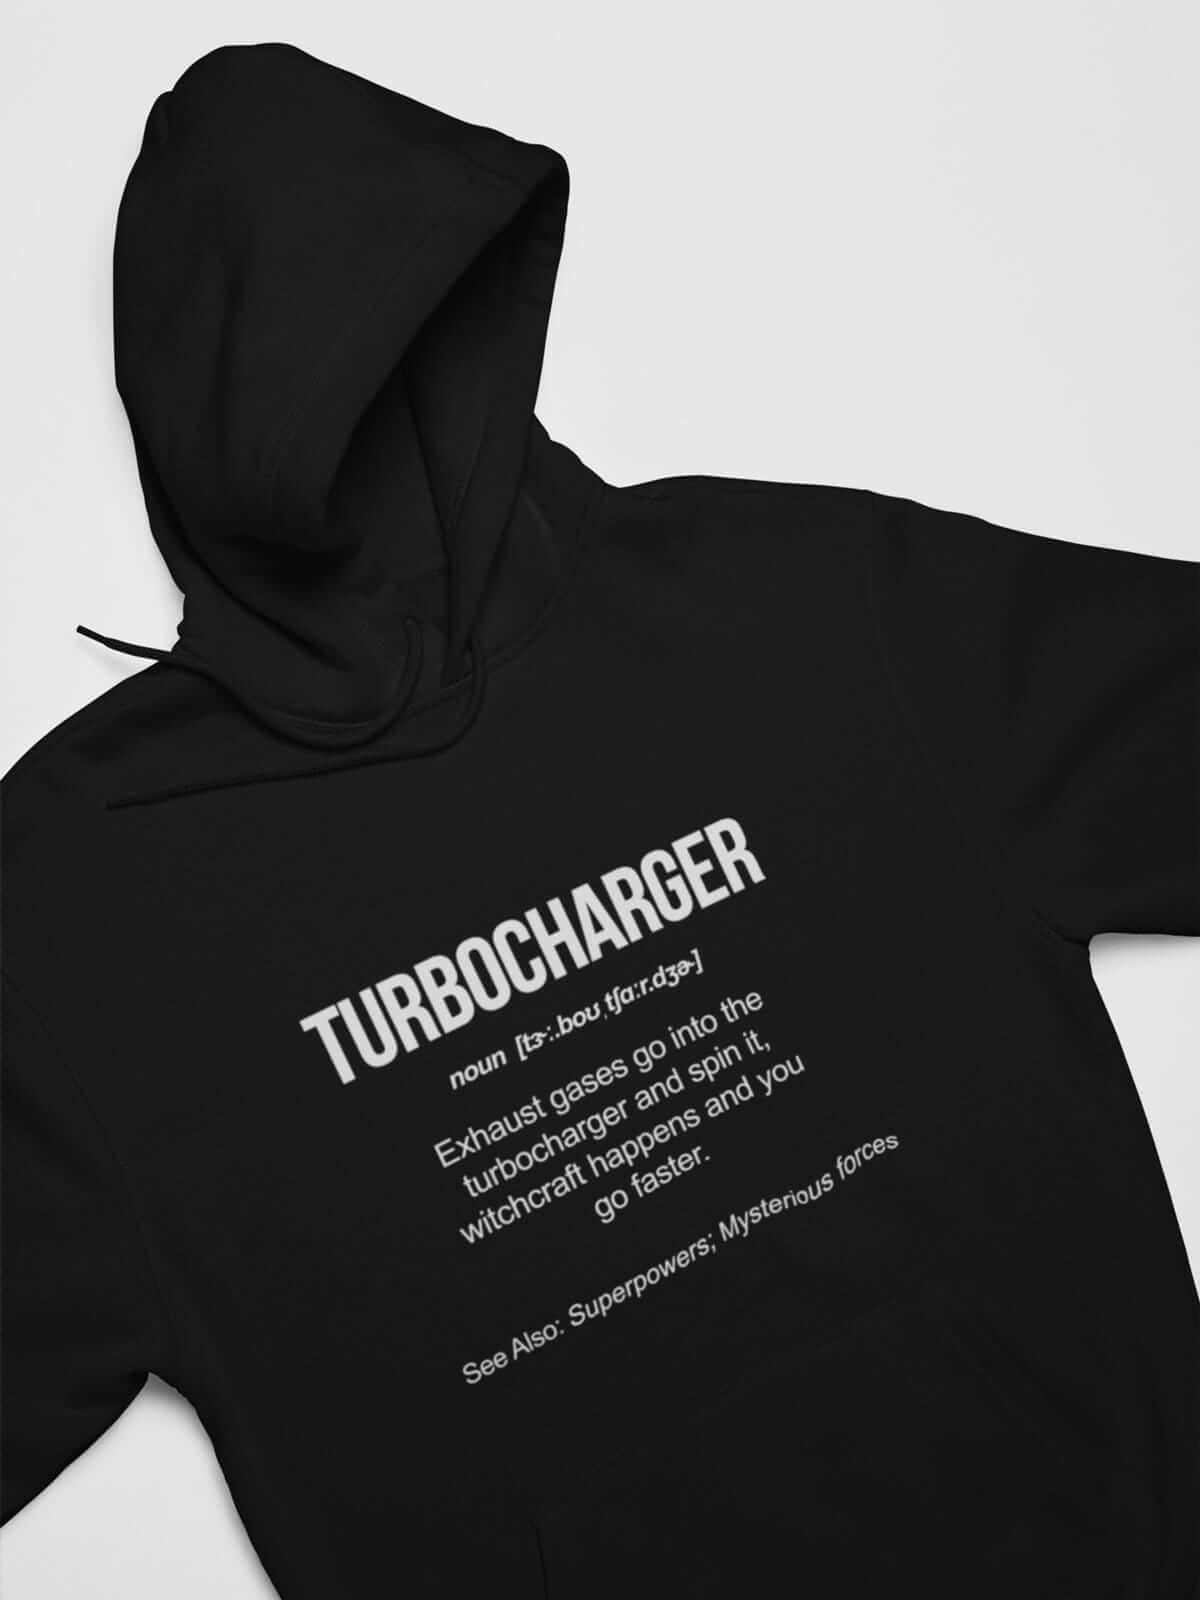 funny-turbocharger-car-hoodie-in-black-car-guy-gift_-car-lovers_-car-enthusiasts_-car-fans_-father_s-day-gift.jpg